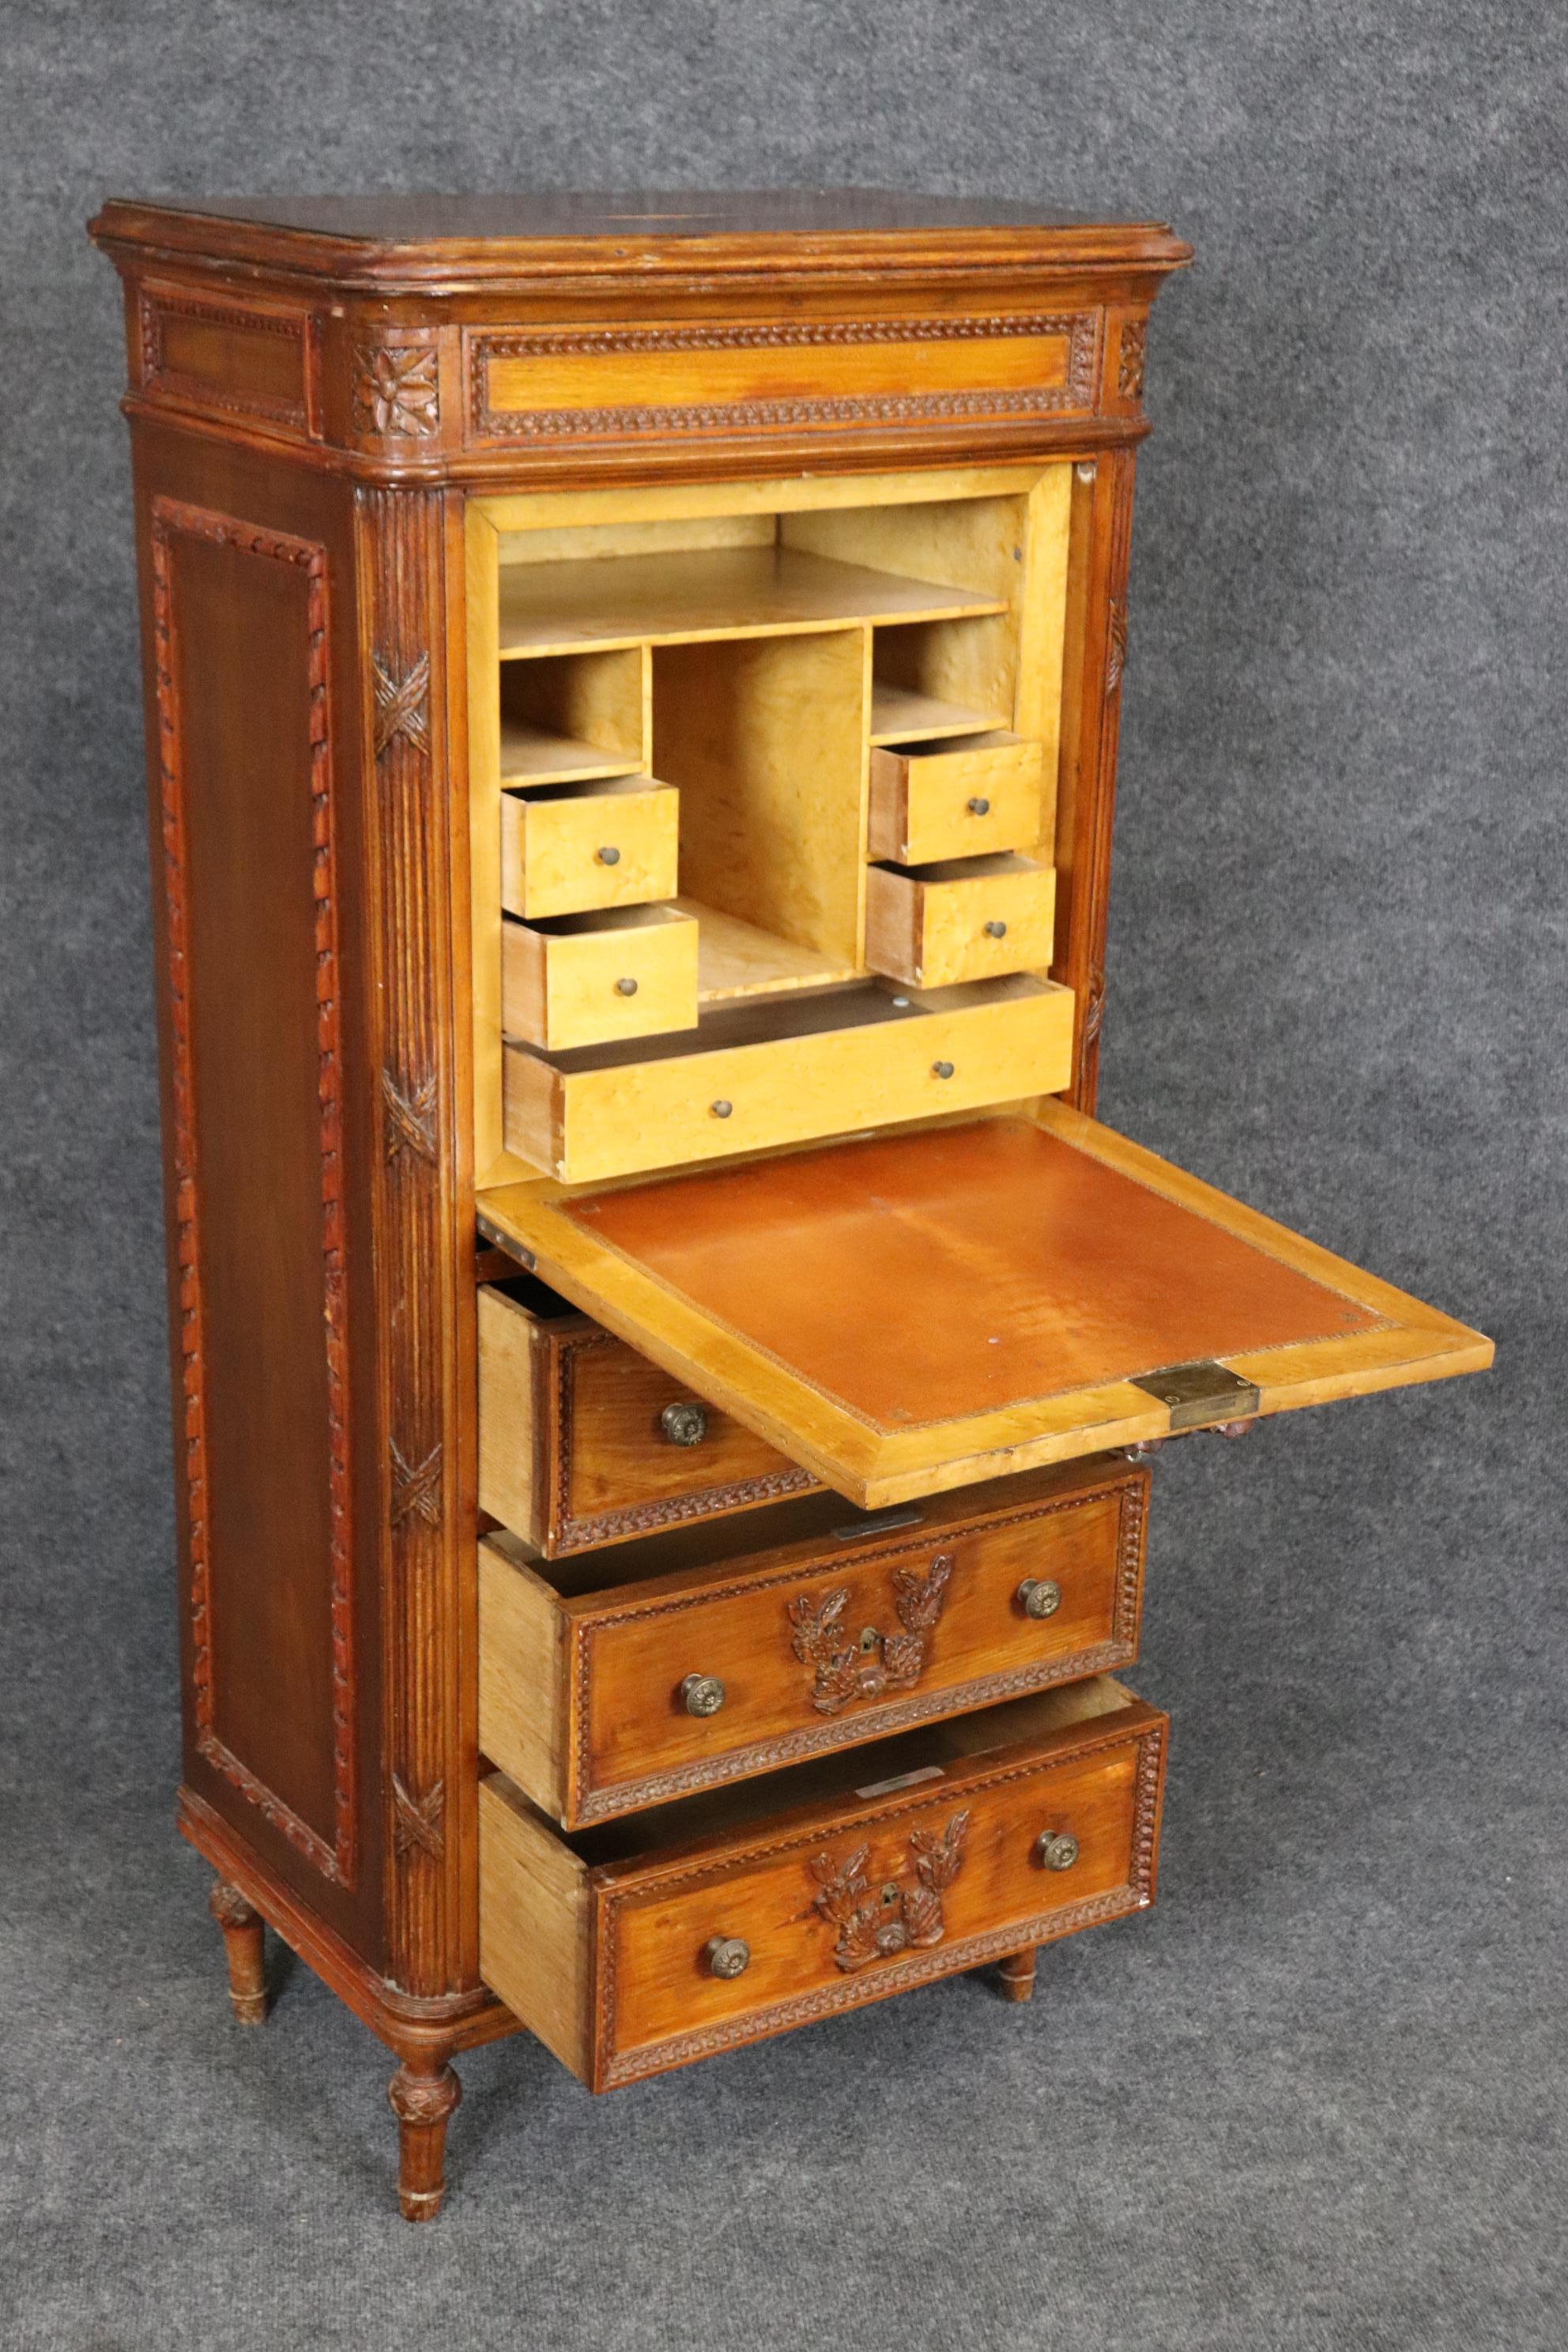 This is a superb carved walnut secretary abatant that's perfect for narrow hallways or shallow areas in a bedroom. The desk is repleat with a tulipwood interior and leather writing surface. The back leg on the left side will be repaired and reset